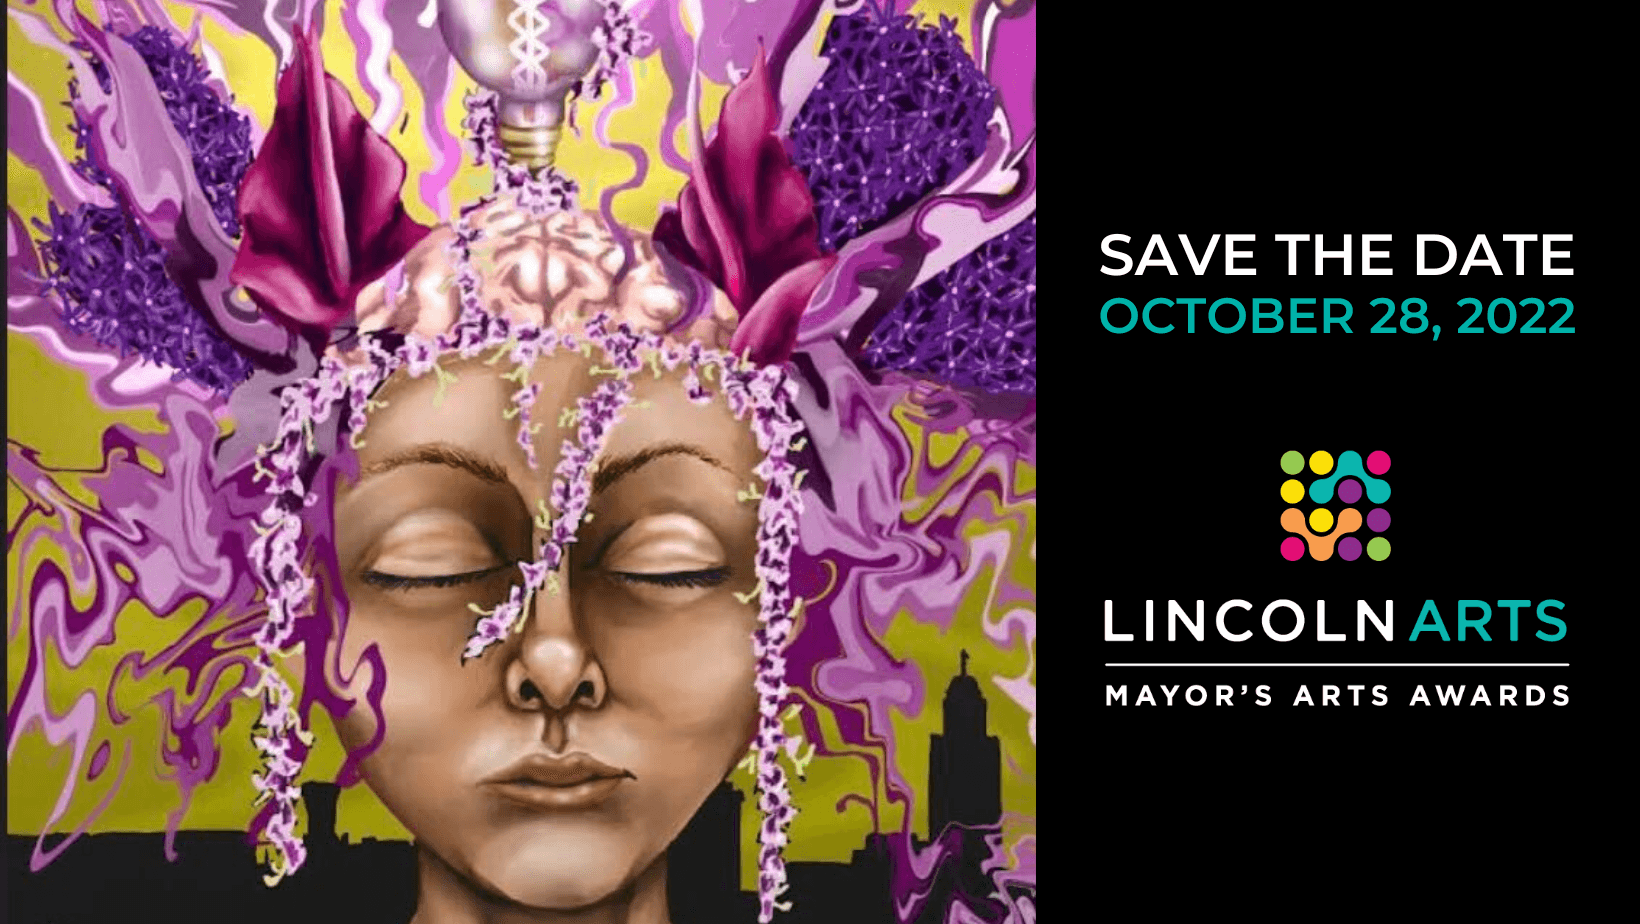 SAVE THE DATE! Mayor’s Arts Awards Coming to You October 28